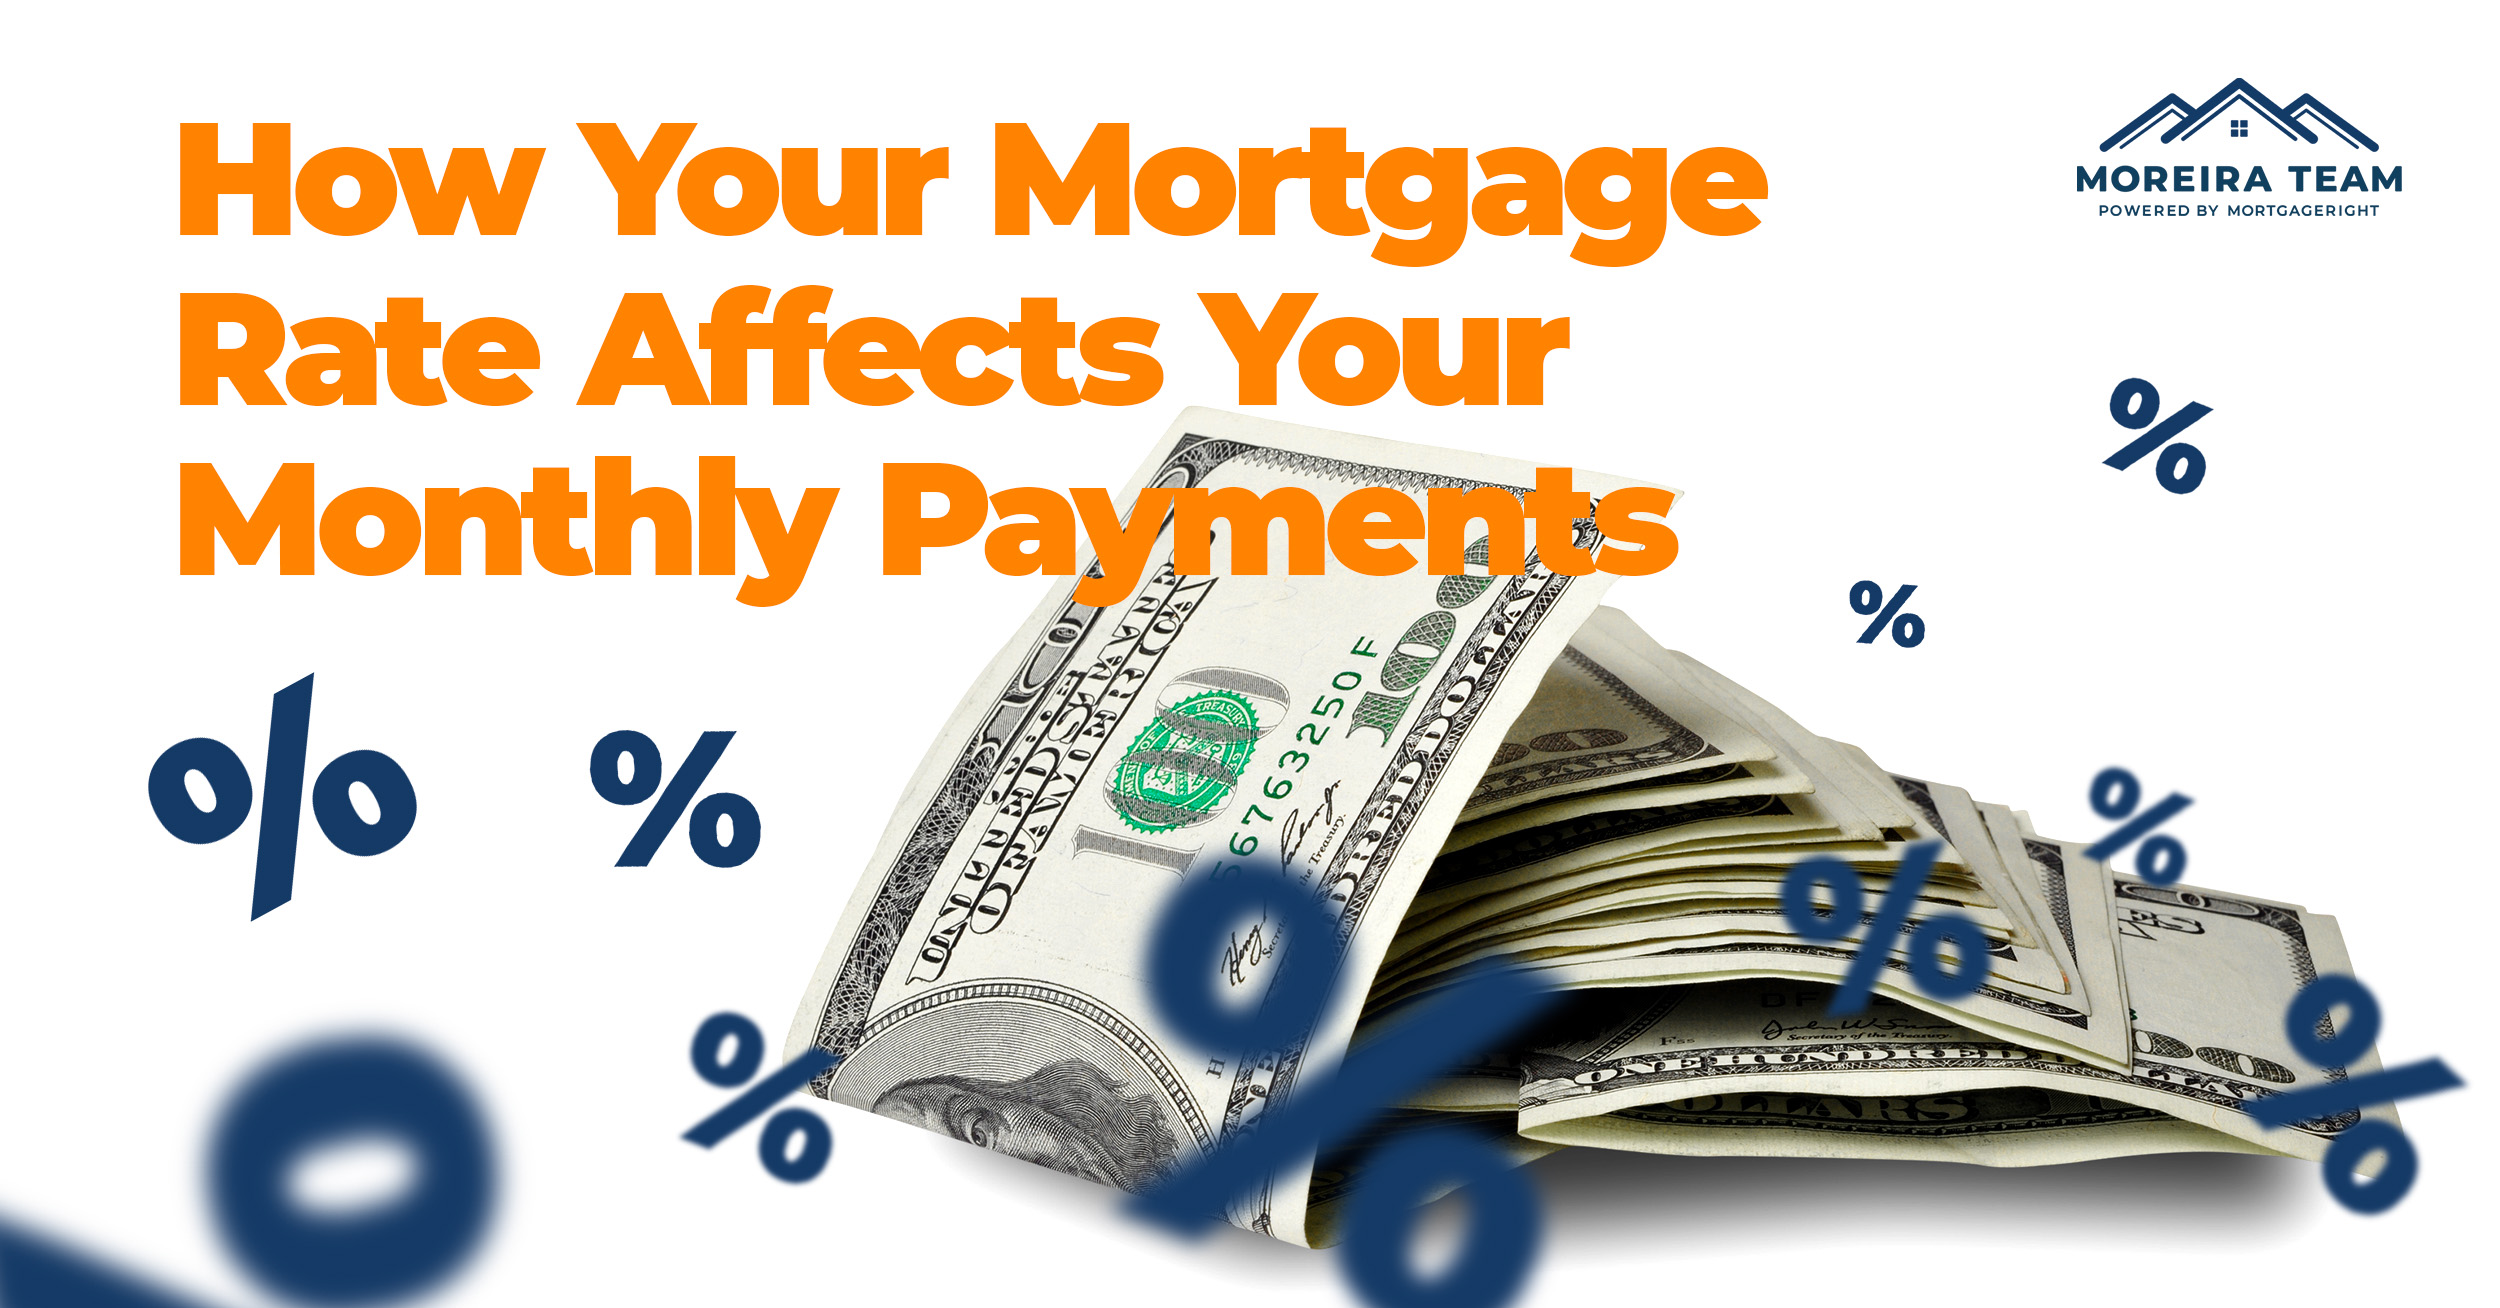 How mortgage rates affect your monthly payment